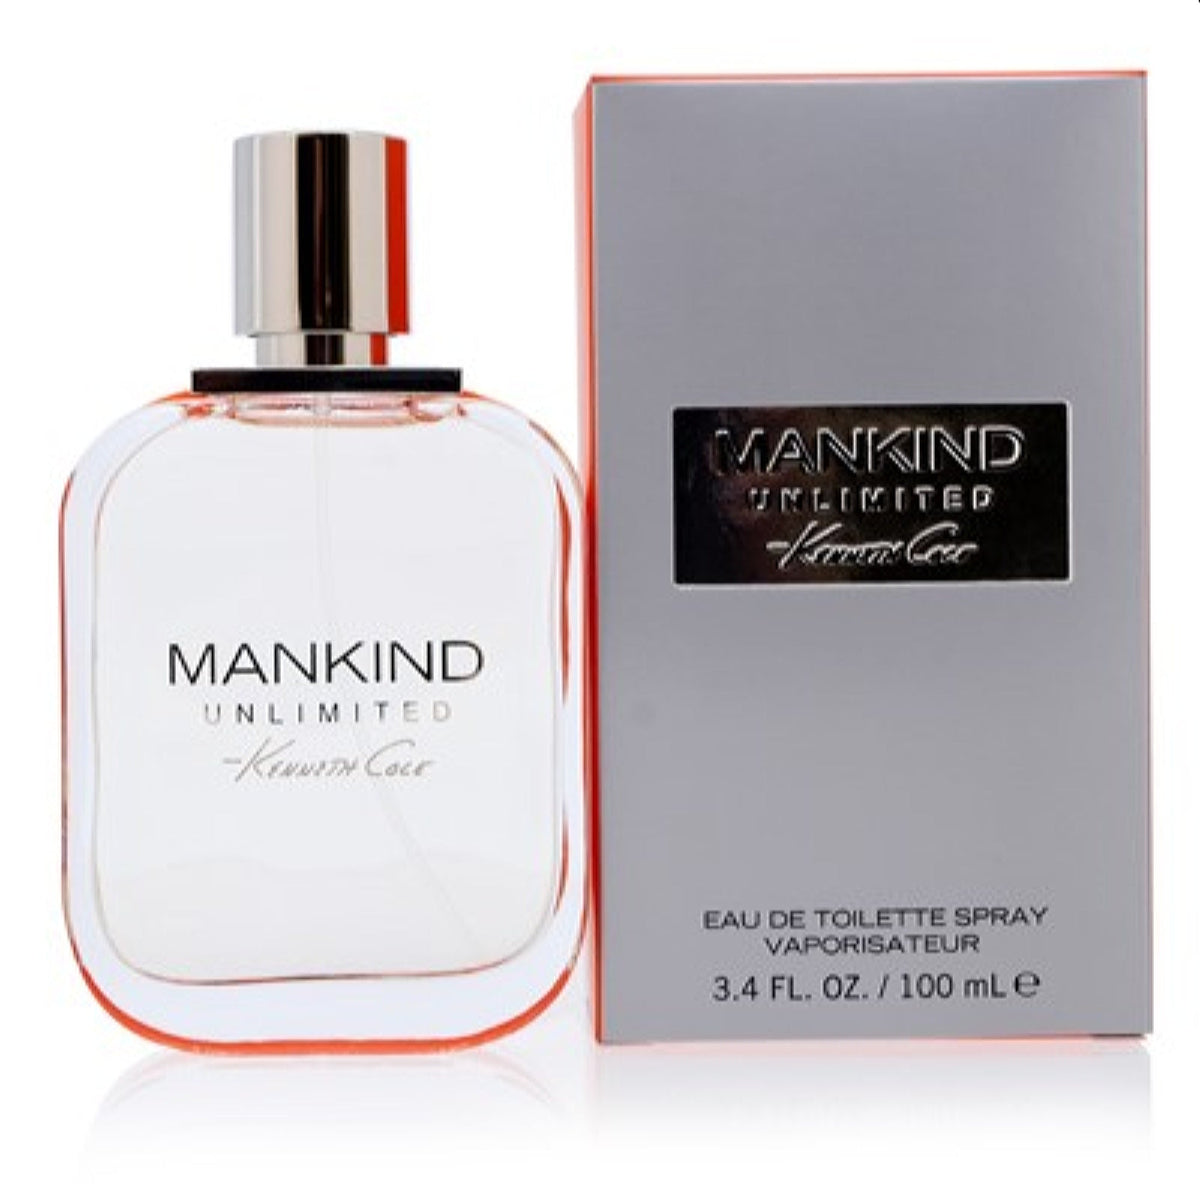 Kenneth Cole Mankind Unlimited Kenneth Cole Edt Spray 3.4 Oz (100 Ml) For Men 3260